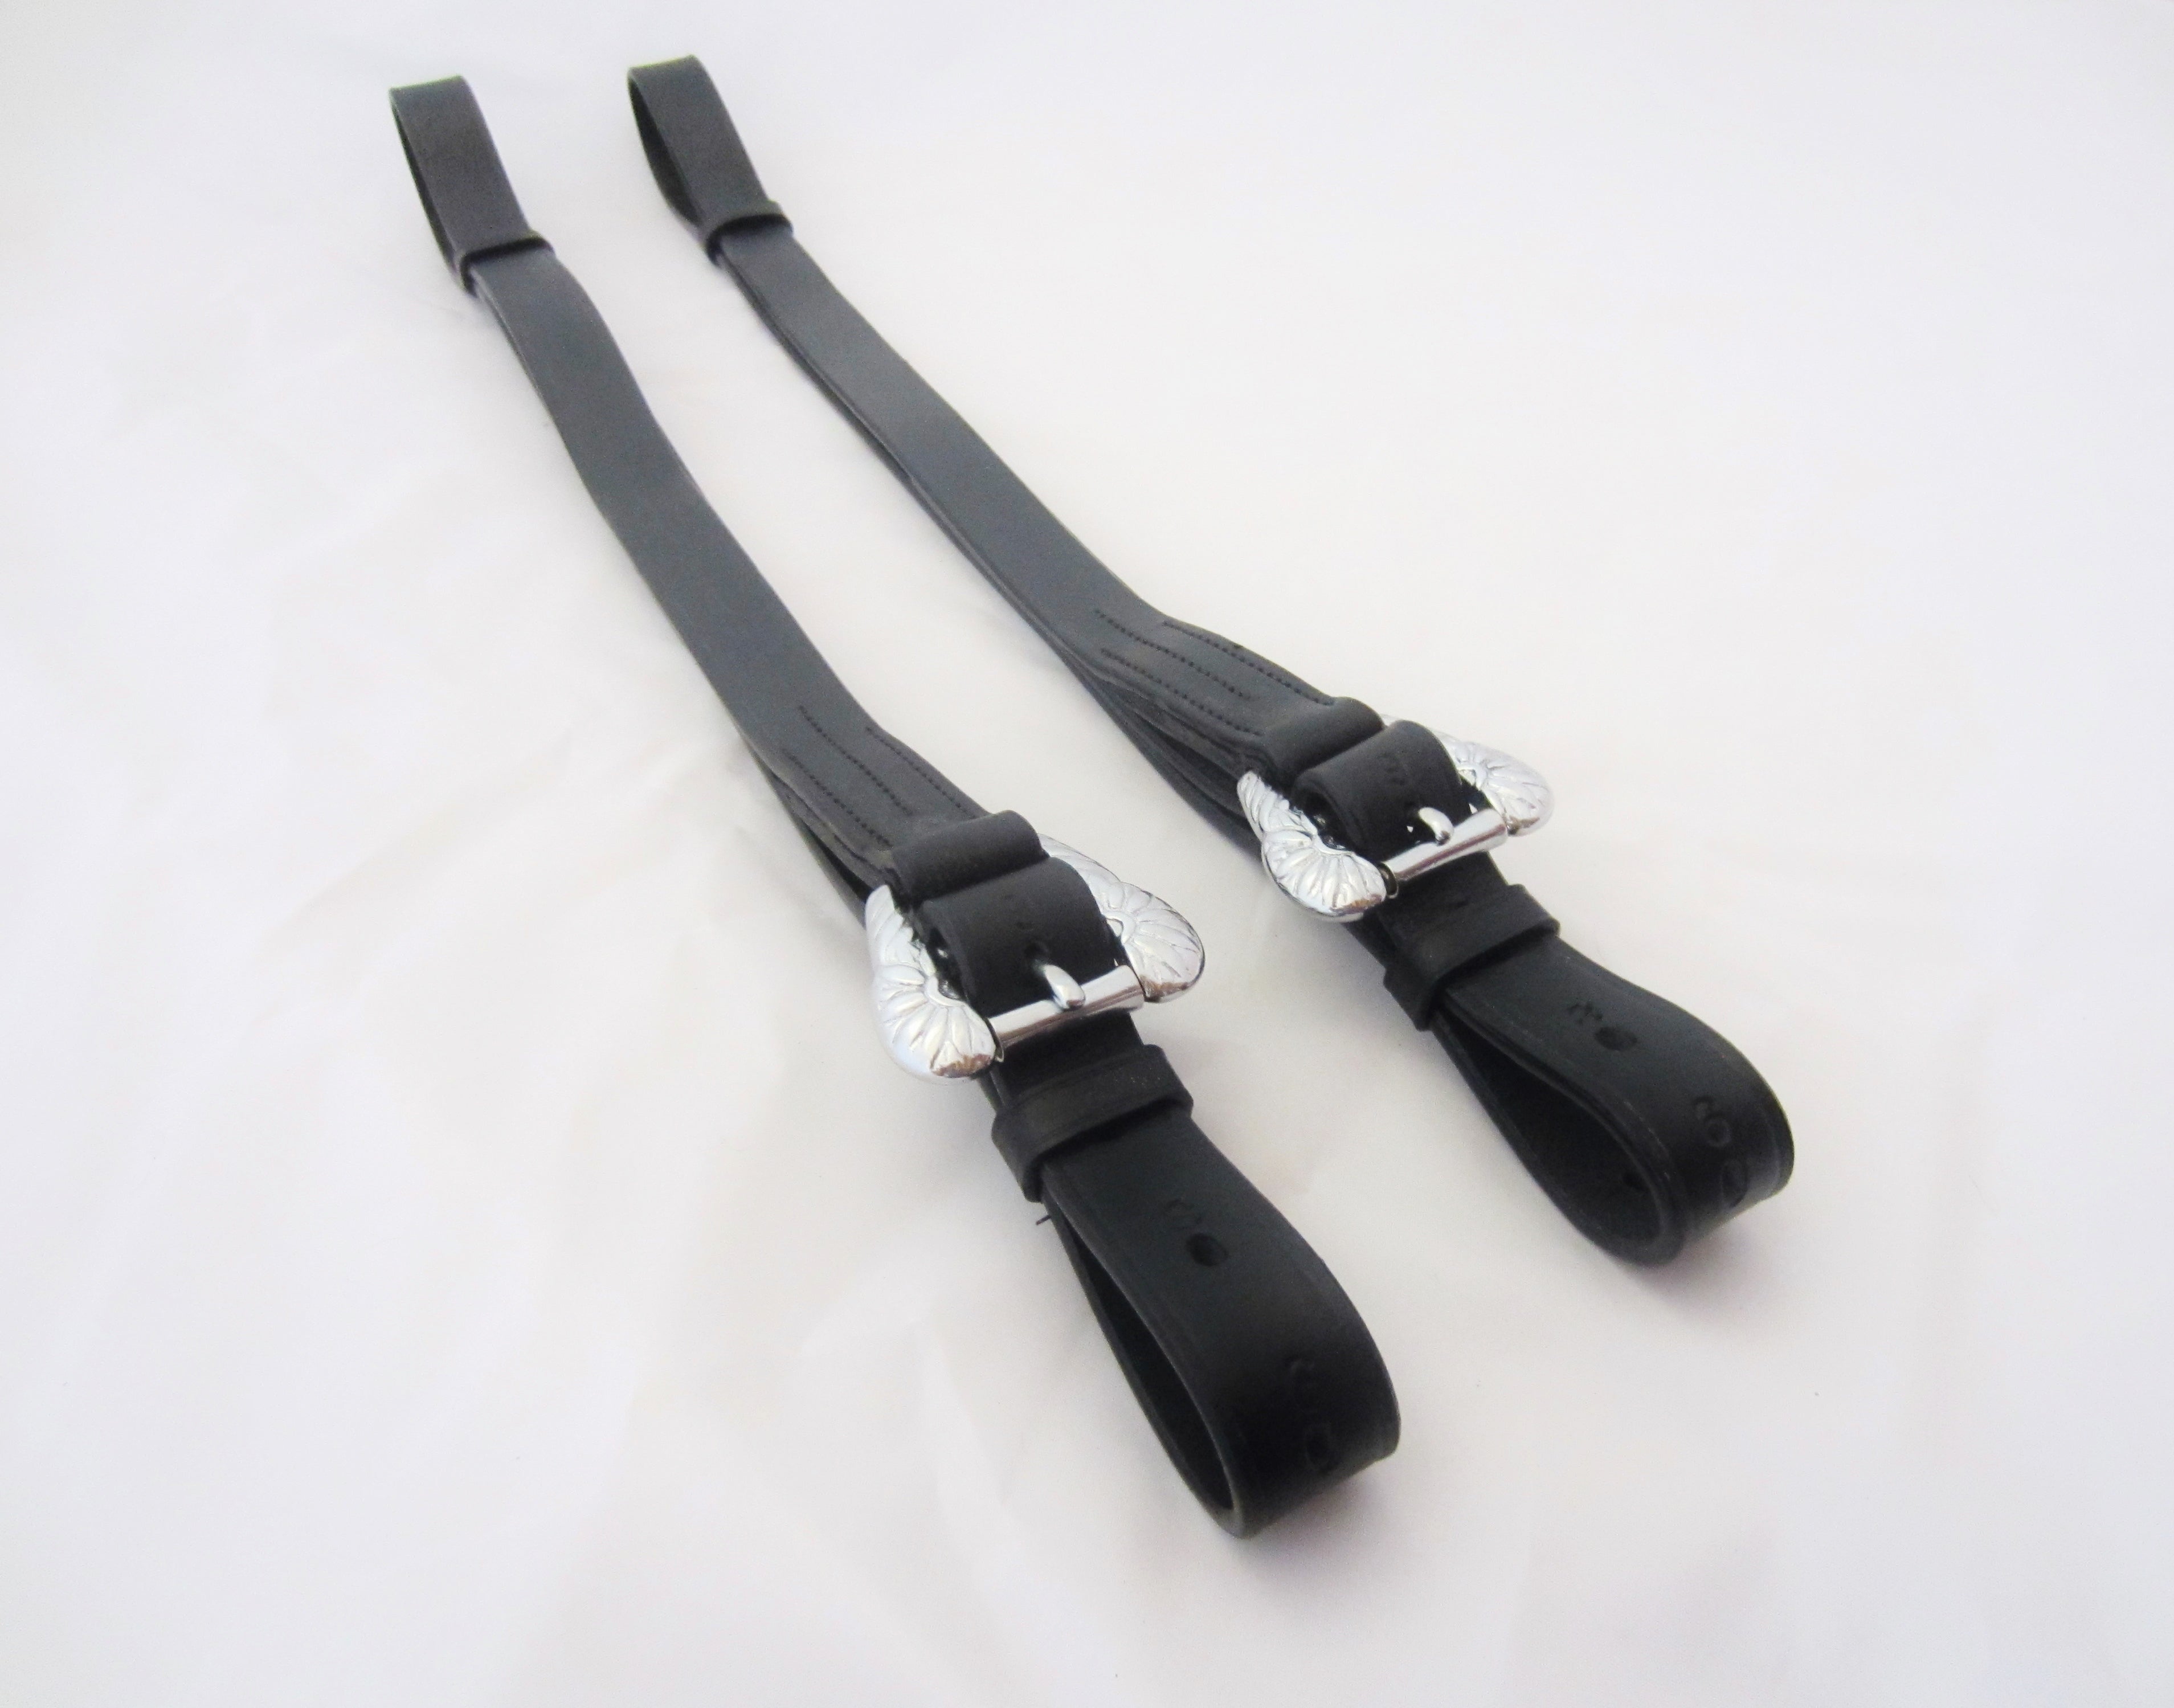 Single pair of baroque stirrup leathers, decorated - black - gold